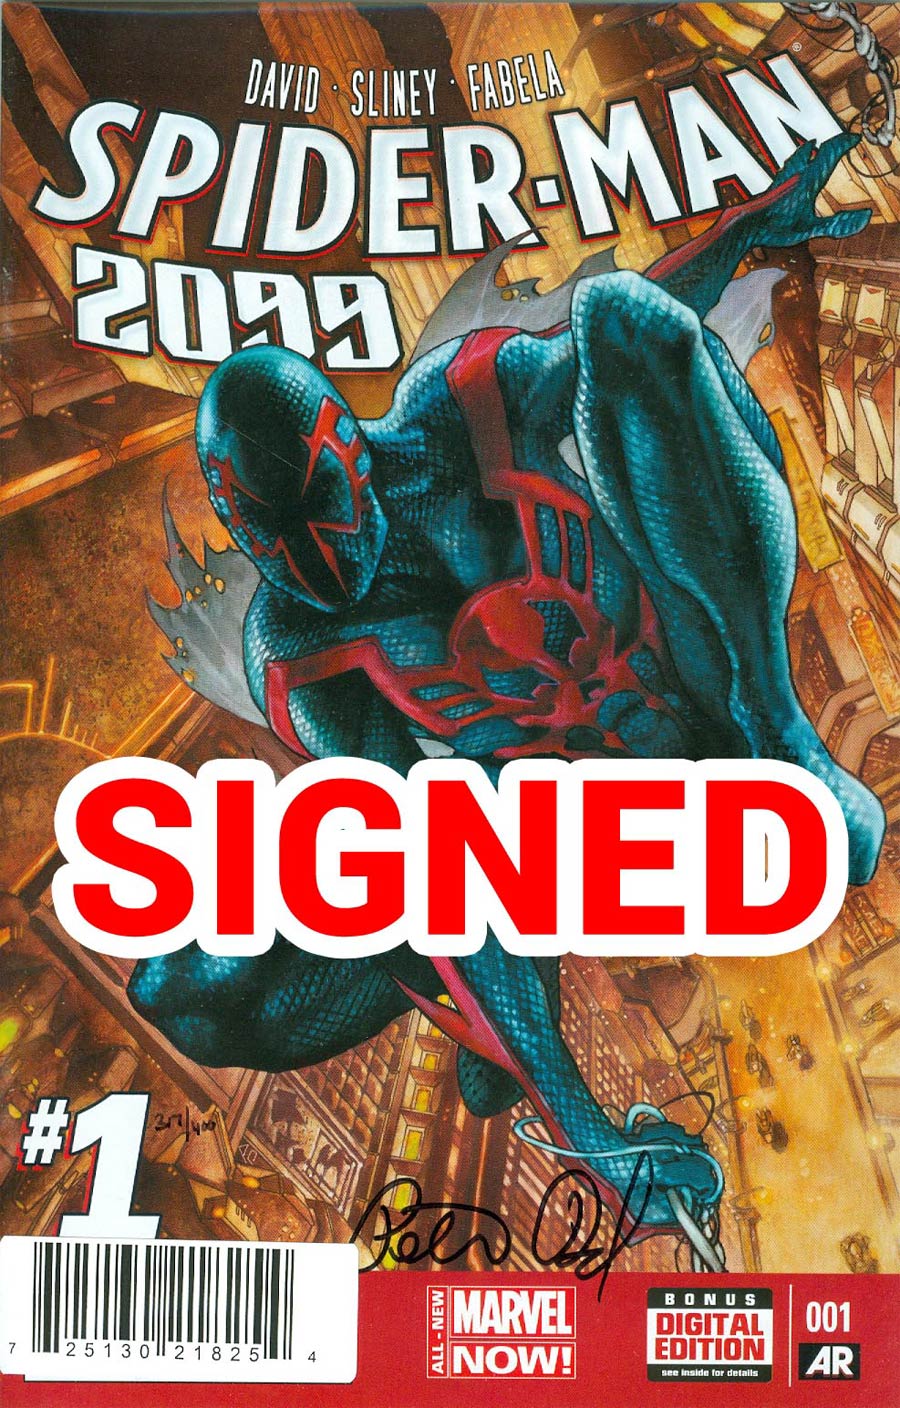 Spider-Man 2099 Vol 2 #1 Cover F DF Signed By Peter David